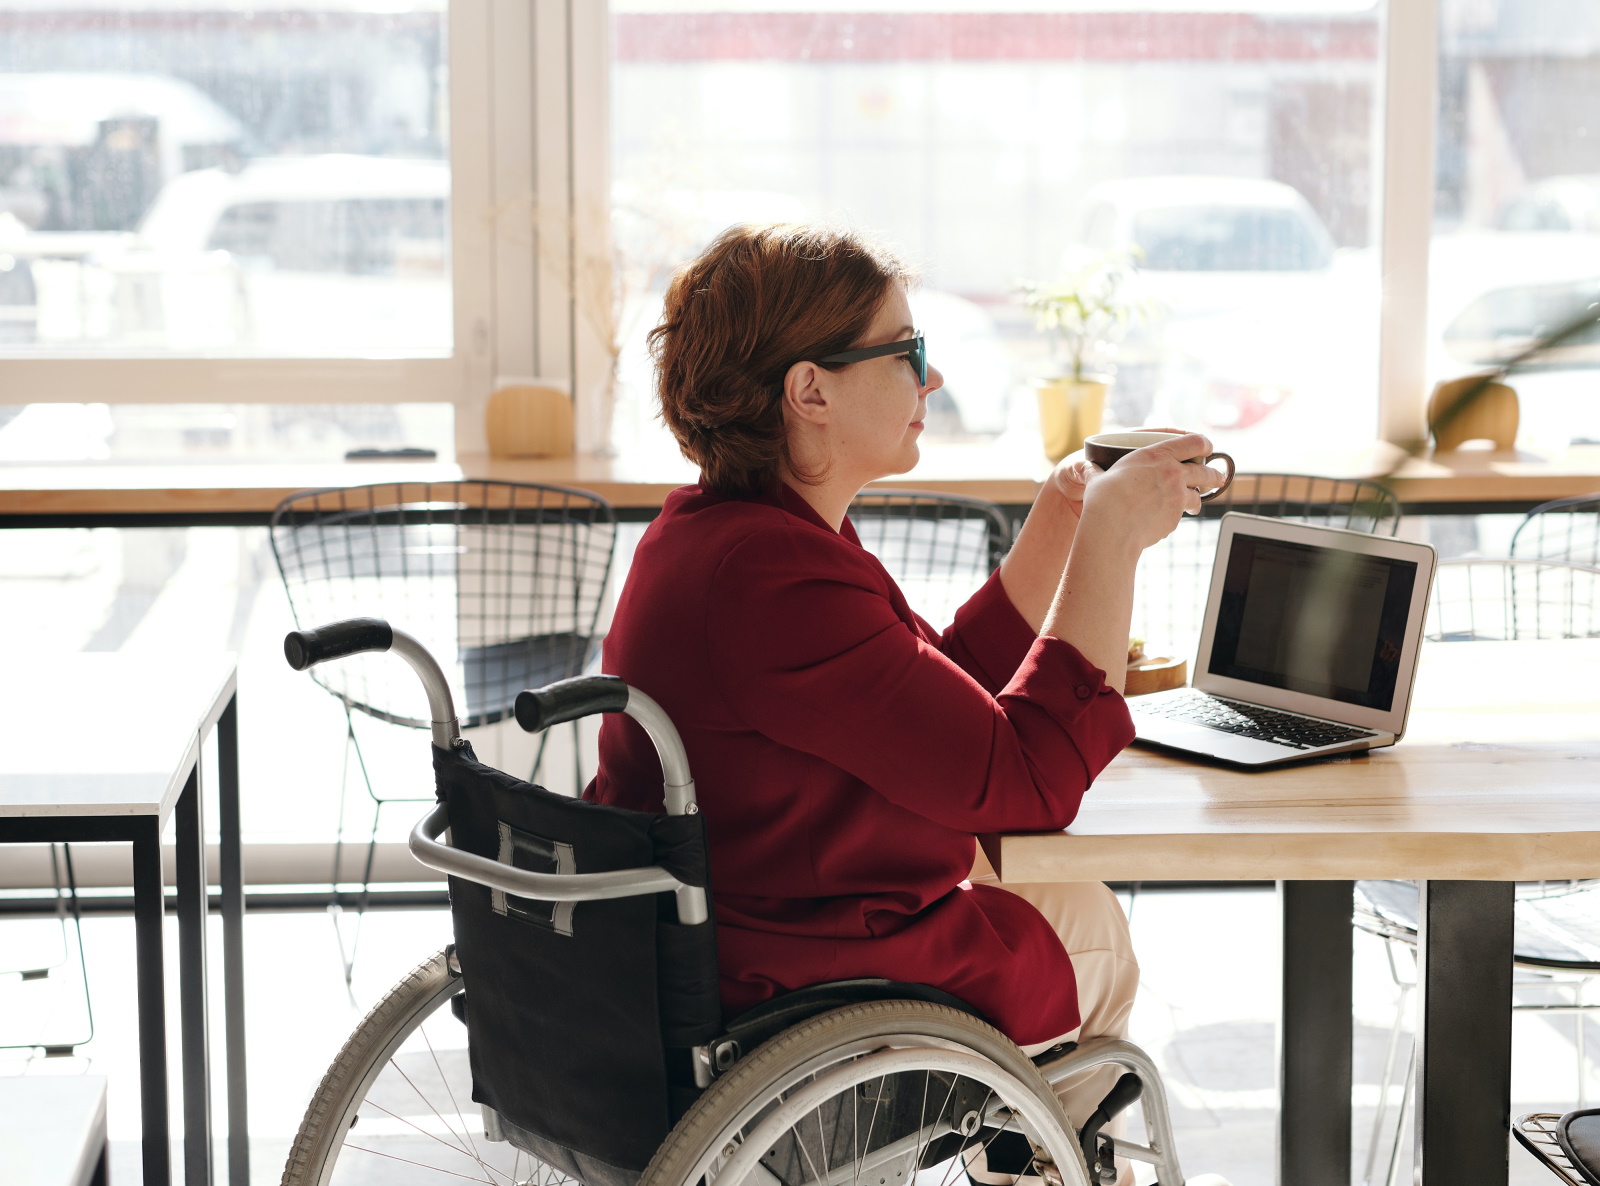 A woman in a wheelchair sat enjoying a cup of coffee as she works in front of a large window